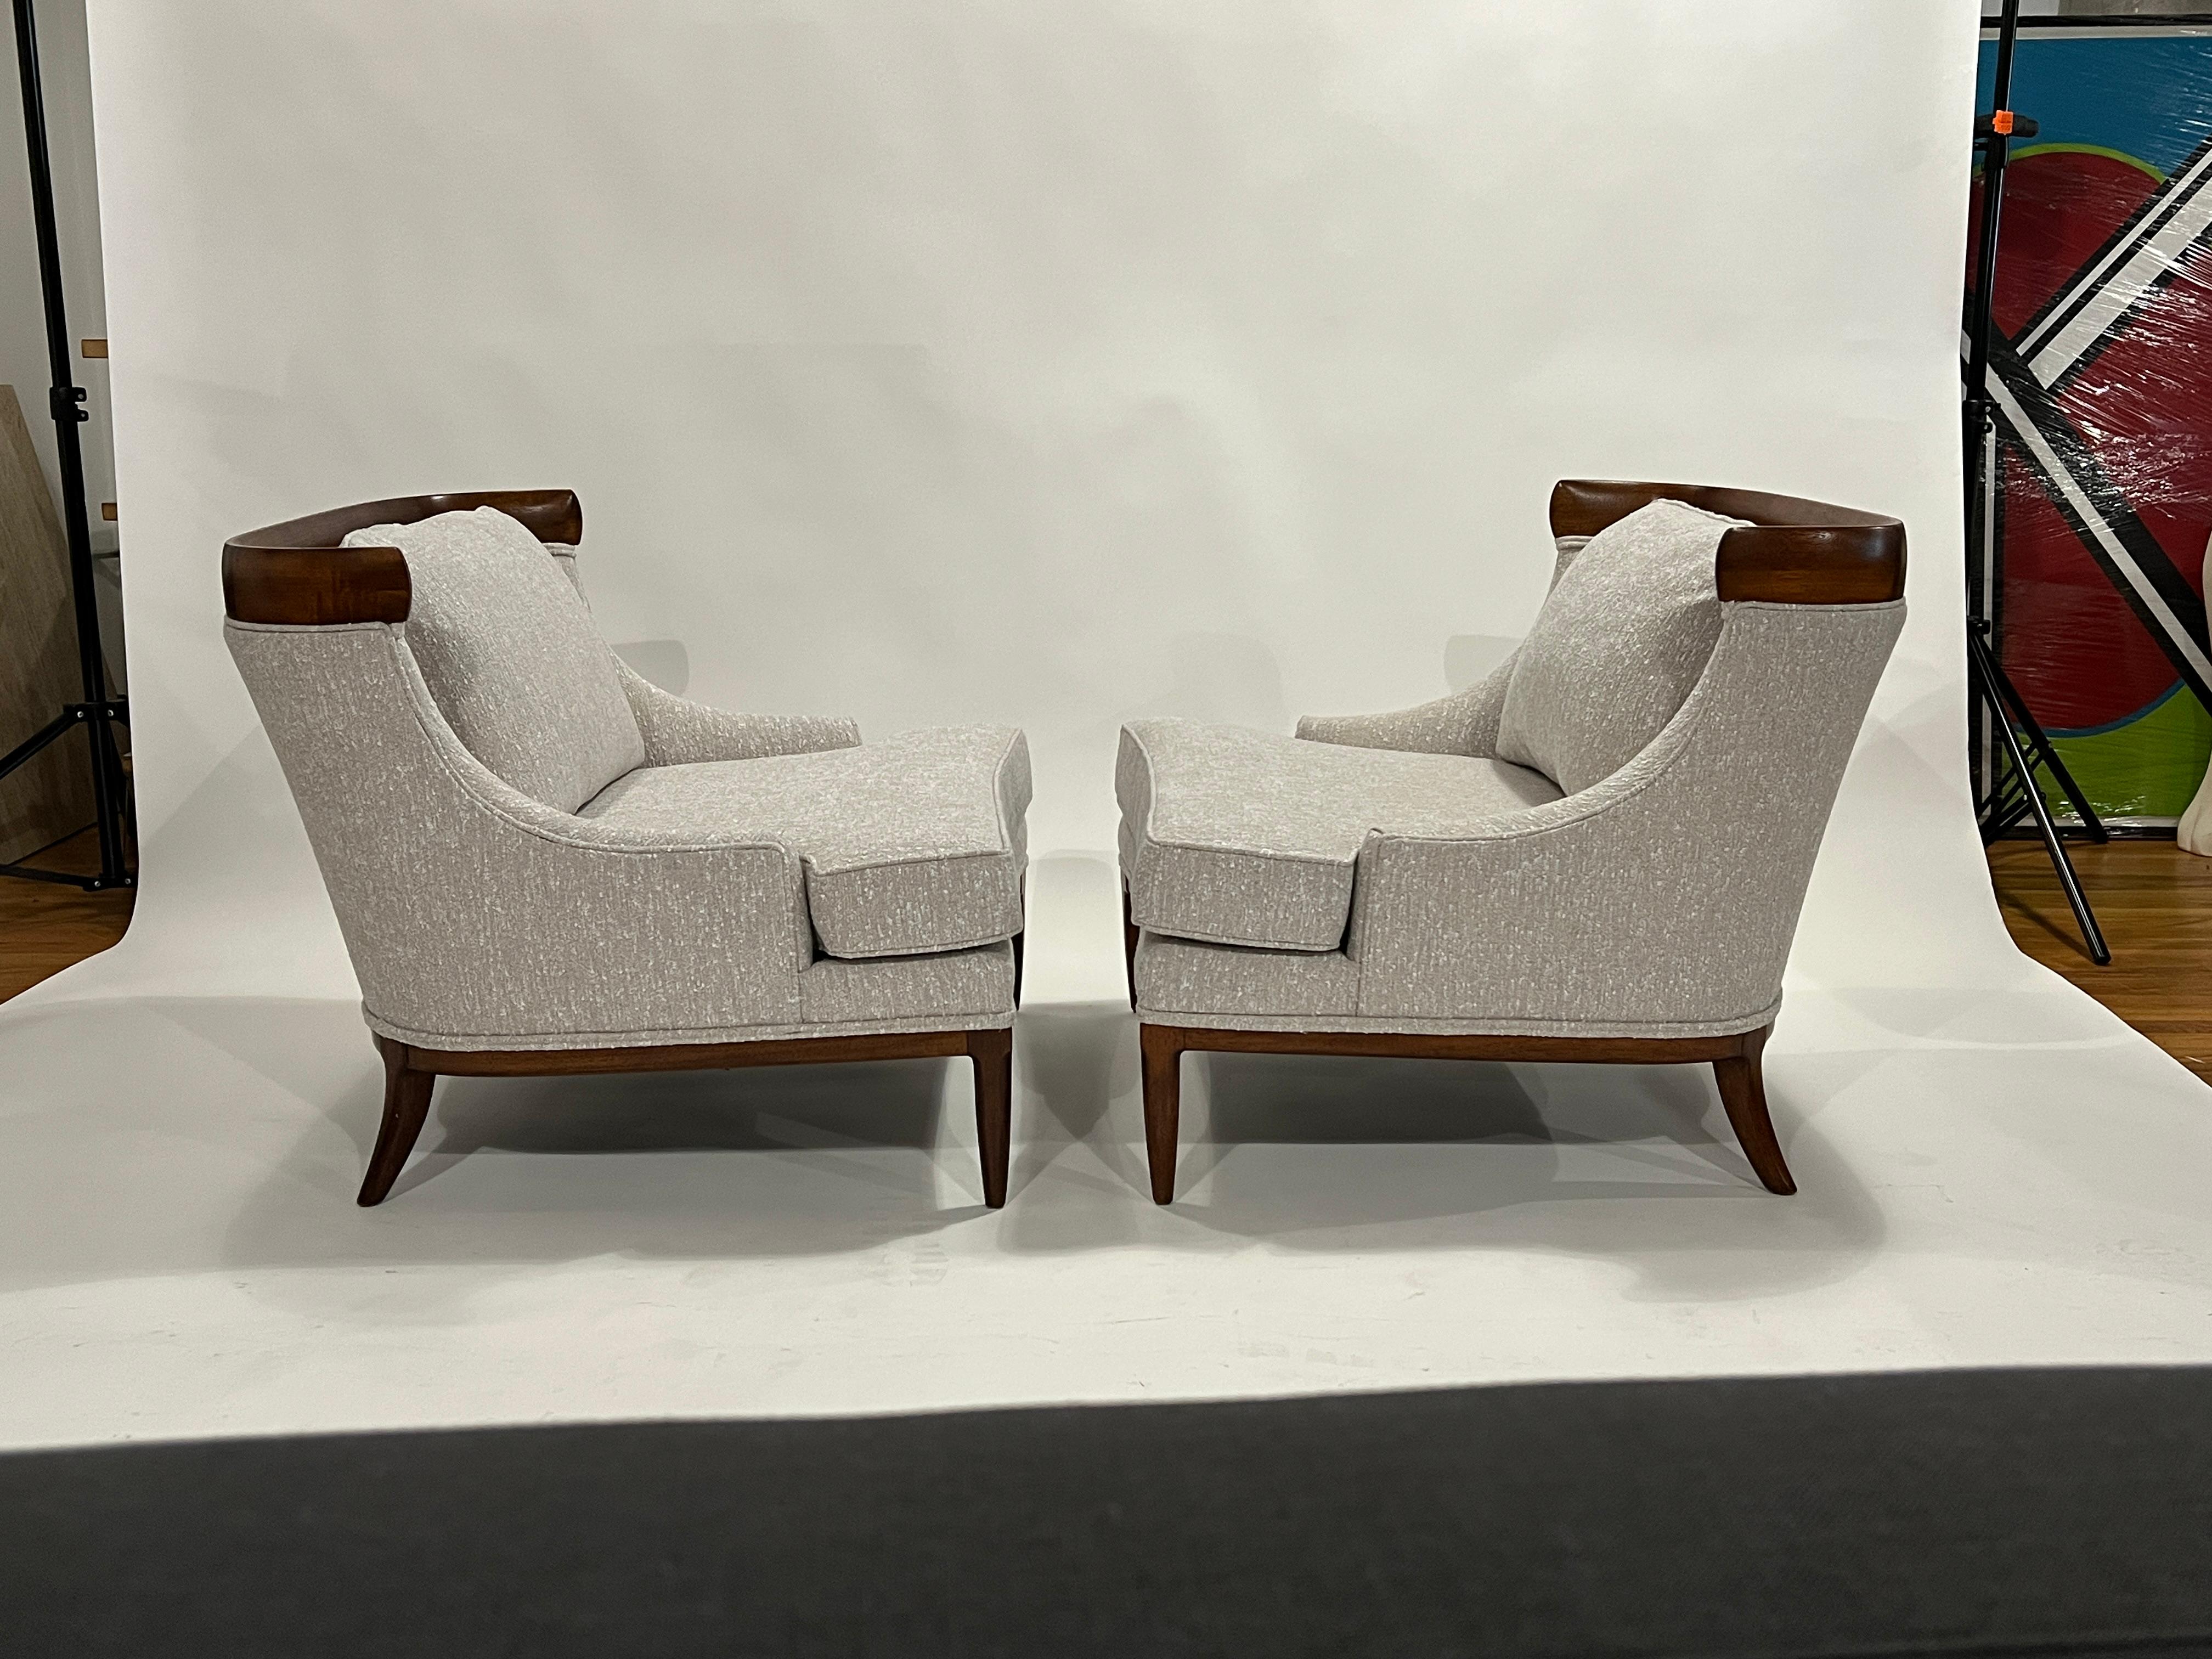 Tomlinson Sophisticate Lounge Chairs by Erwin Lambeth In Excellent Condition For Sale In Chicago, IL